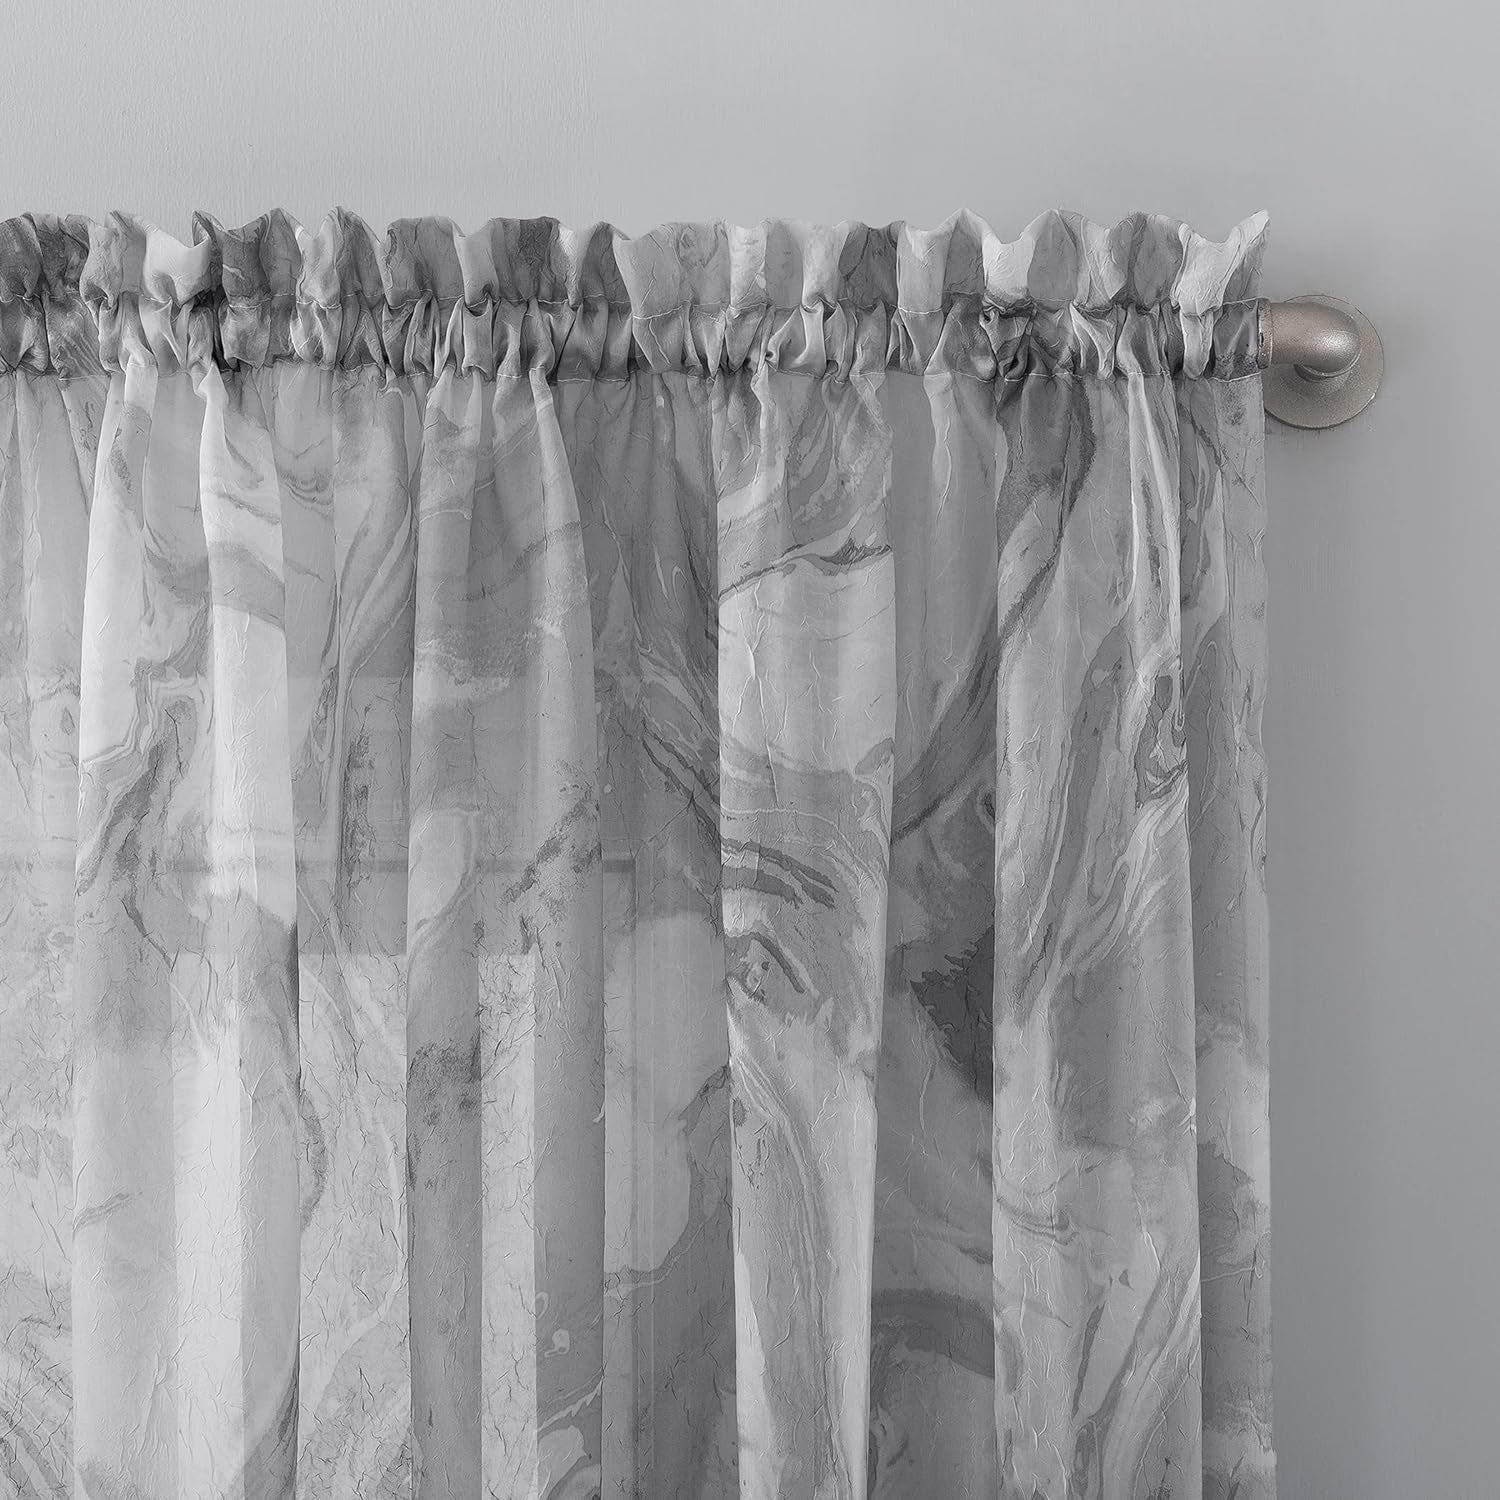 No. 918 Cristo Crushed Sheer Voile Rod Pocket Curtain Panel, 51" X 63", Grey  No. 918   